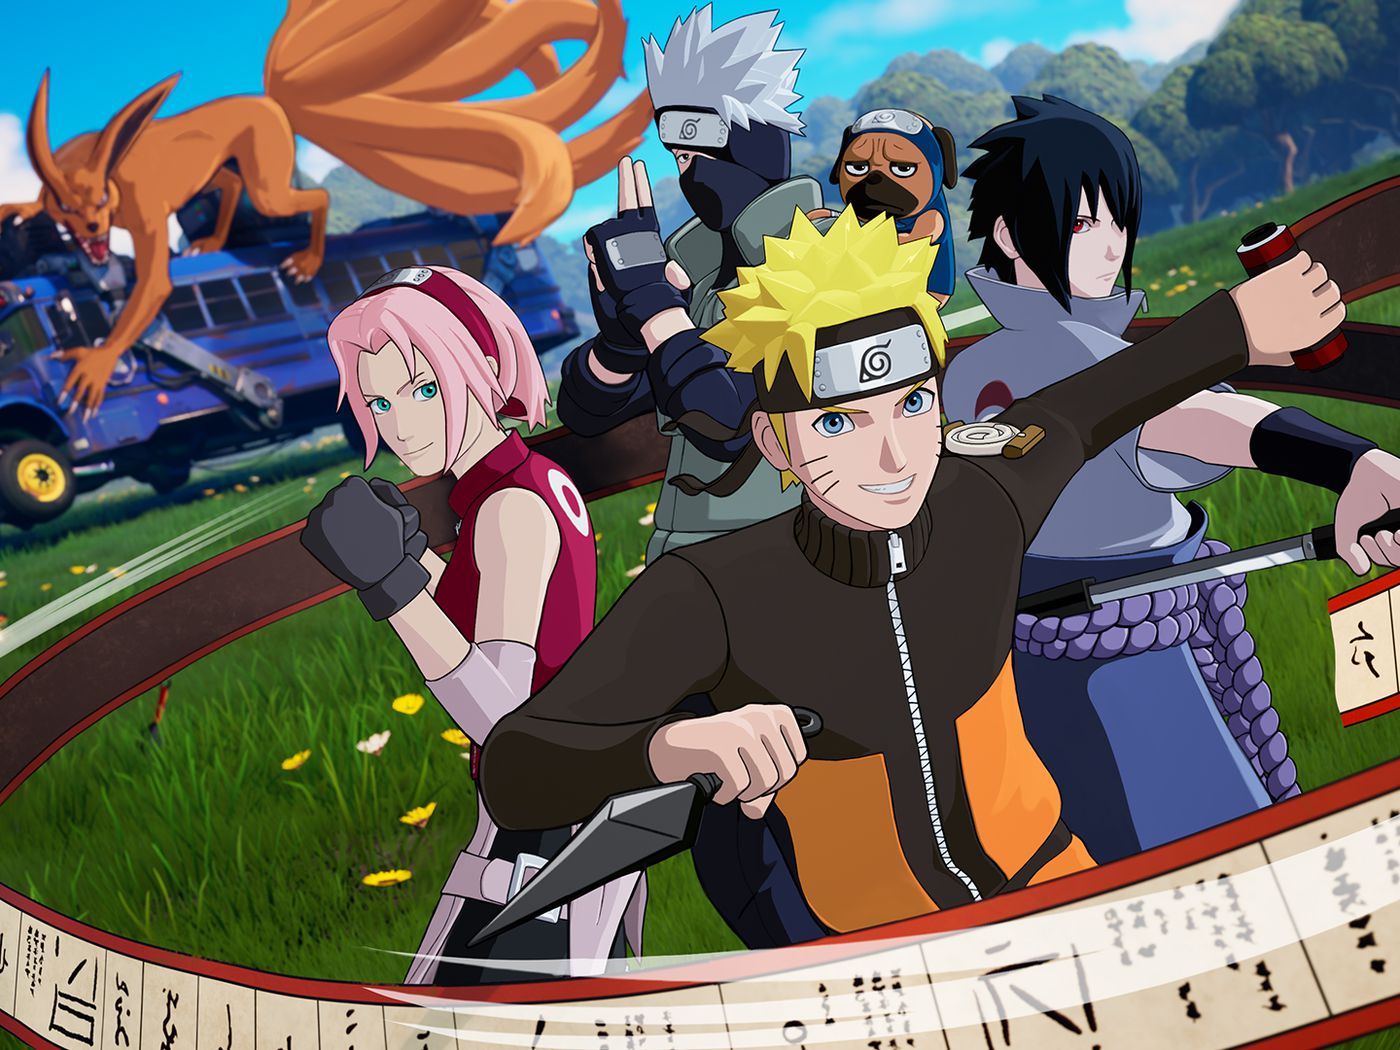 Fortnites naruto collab includes more than just skins